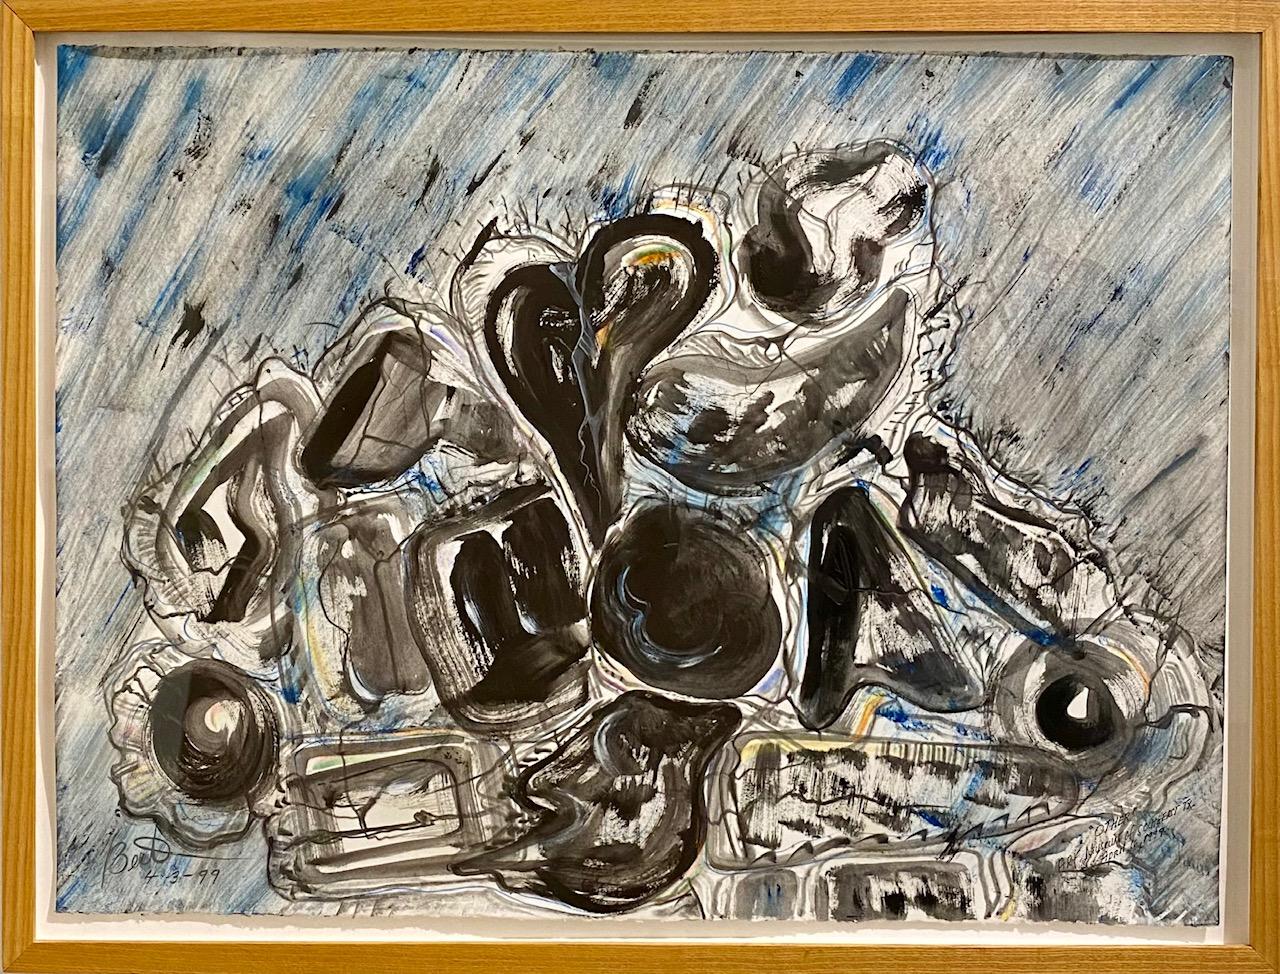 This mixed media painting on paper is one in a series of studies leading up to Long’s major ice sculpture installation Other in May of 2000.

Bert L. Long Jr., was self-taught artist, was born in 1940 in Texas, grew up the Houston’s historic Fifth